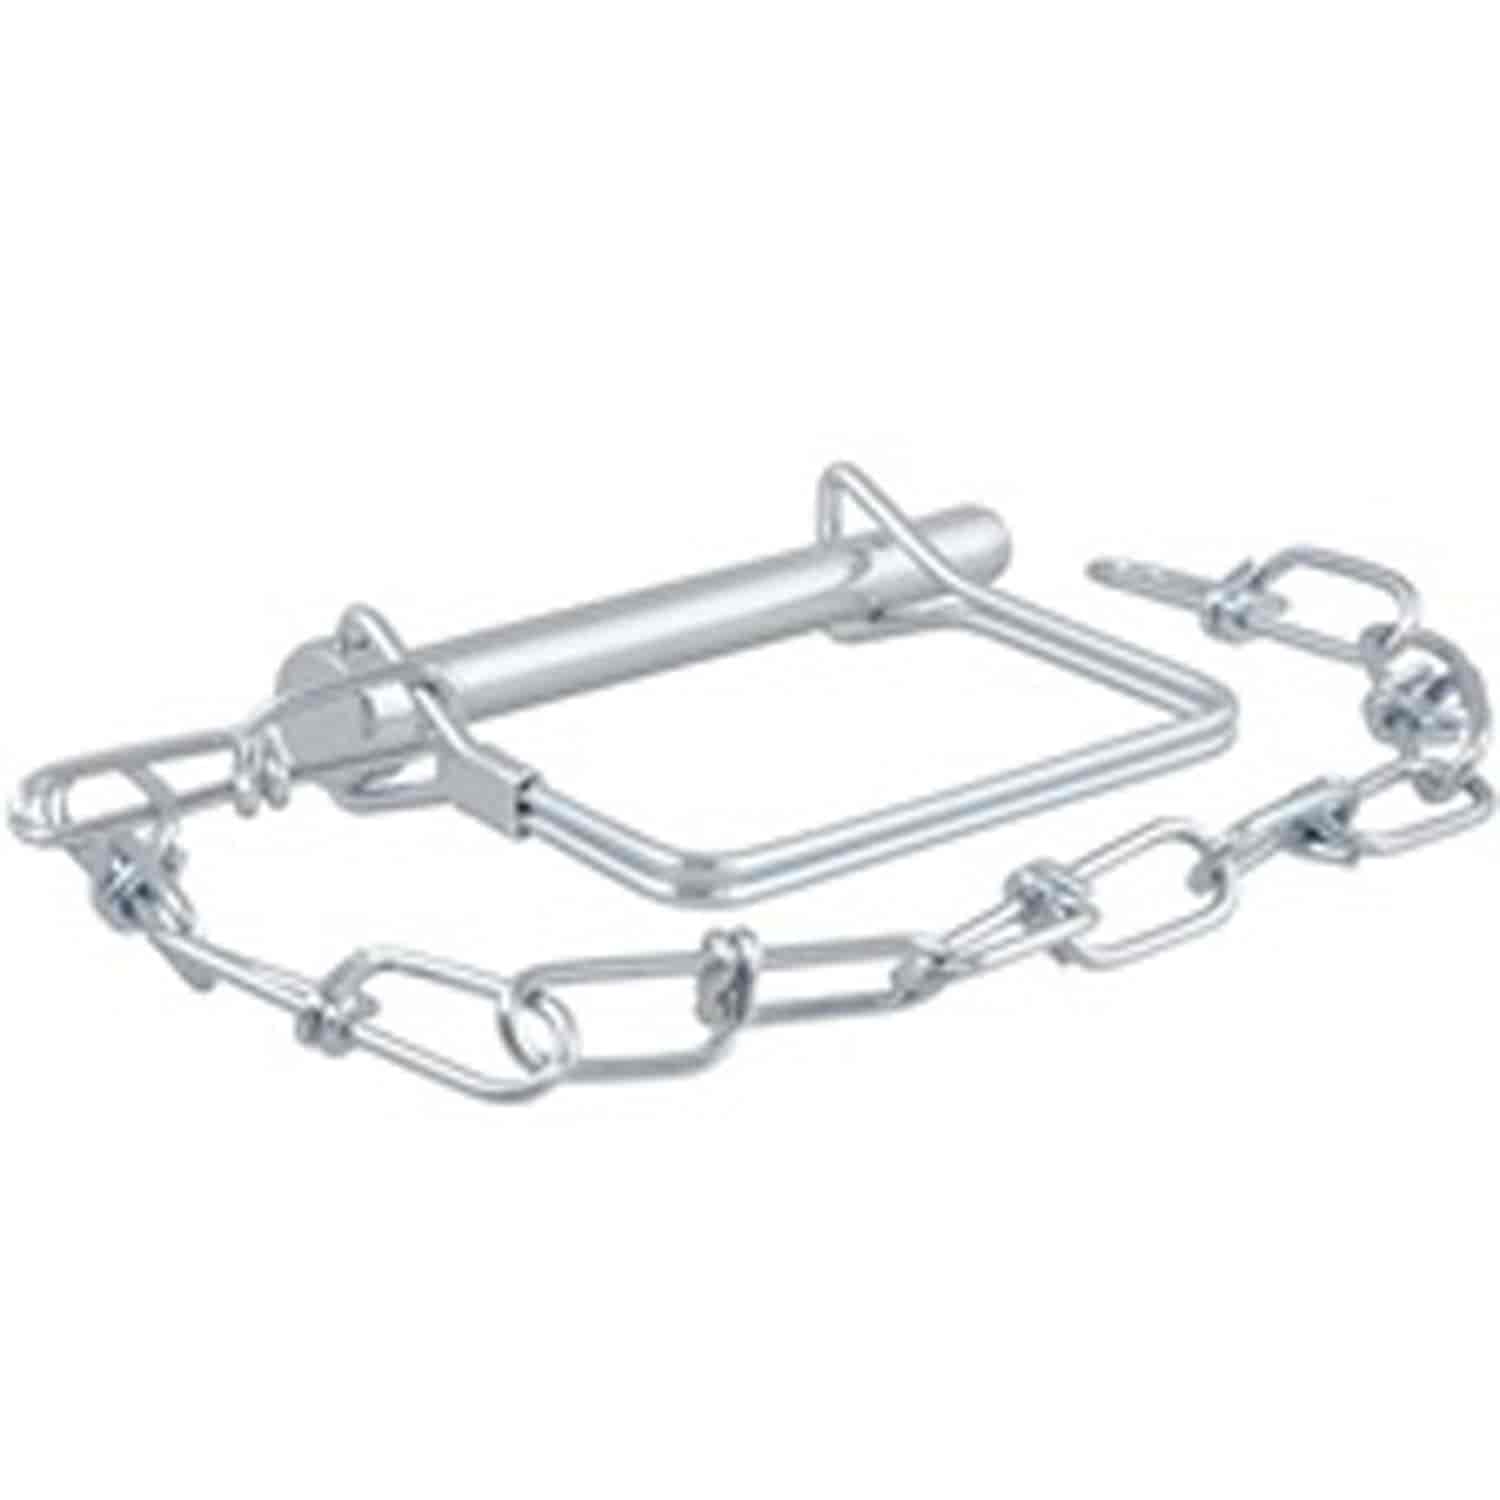 SAFETY PIN 5/16 WITH CHAIN PACKAGED